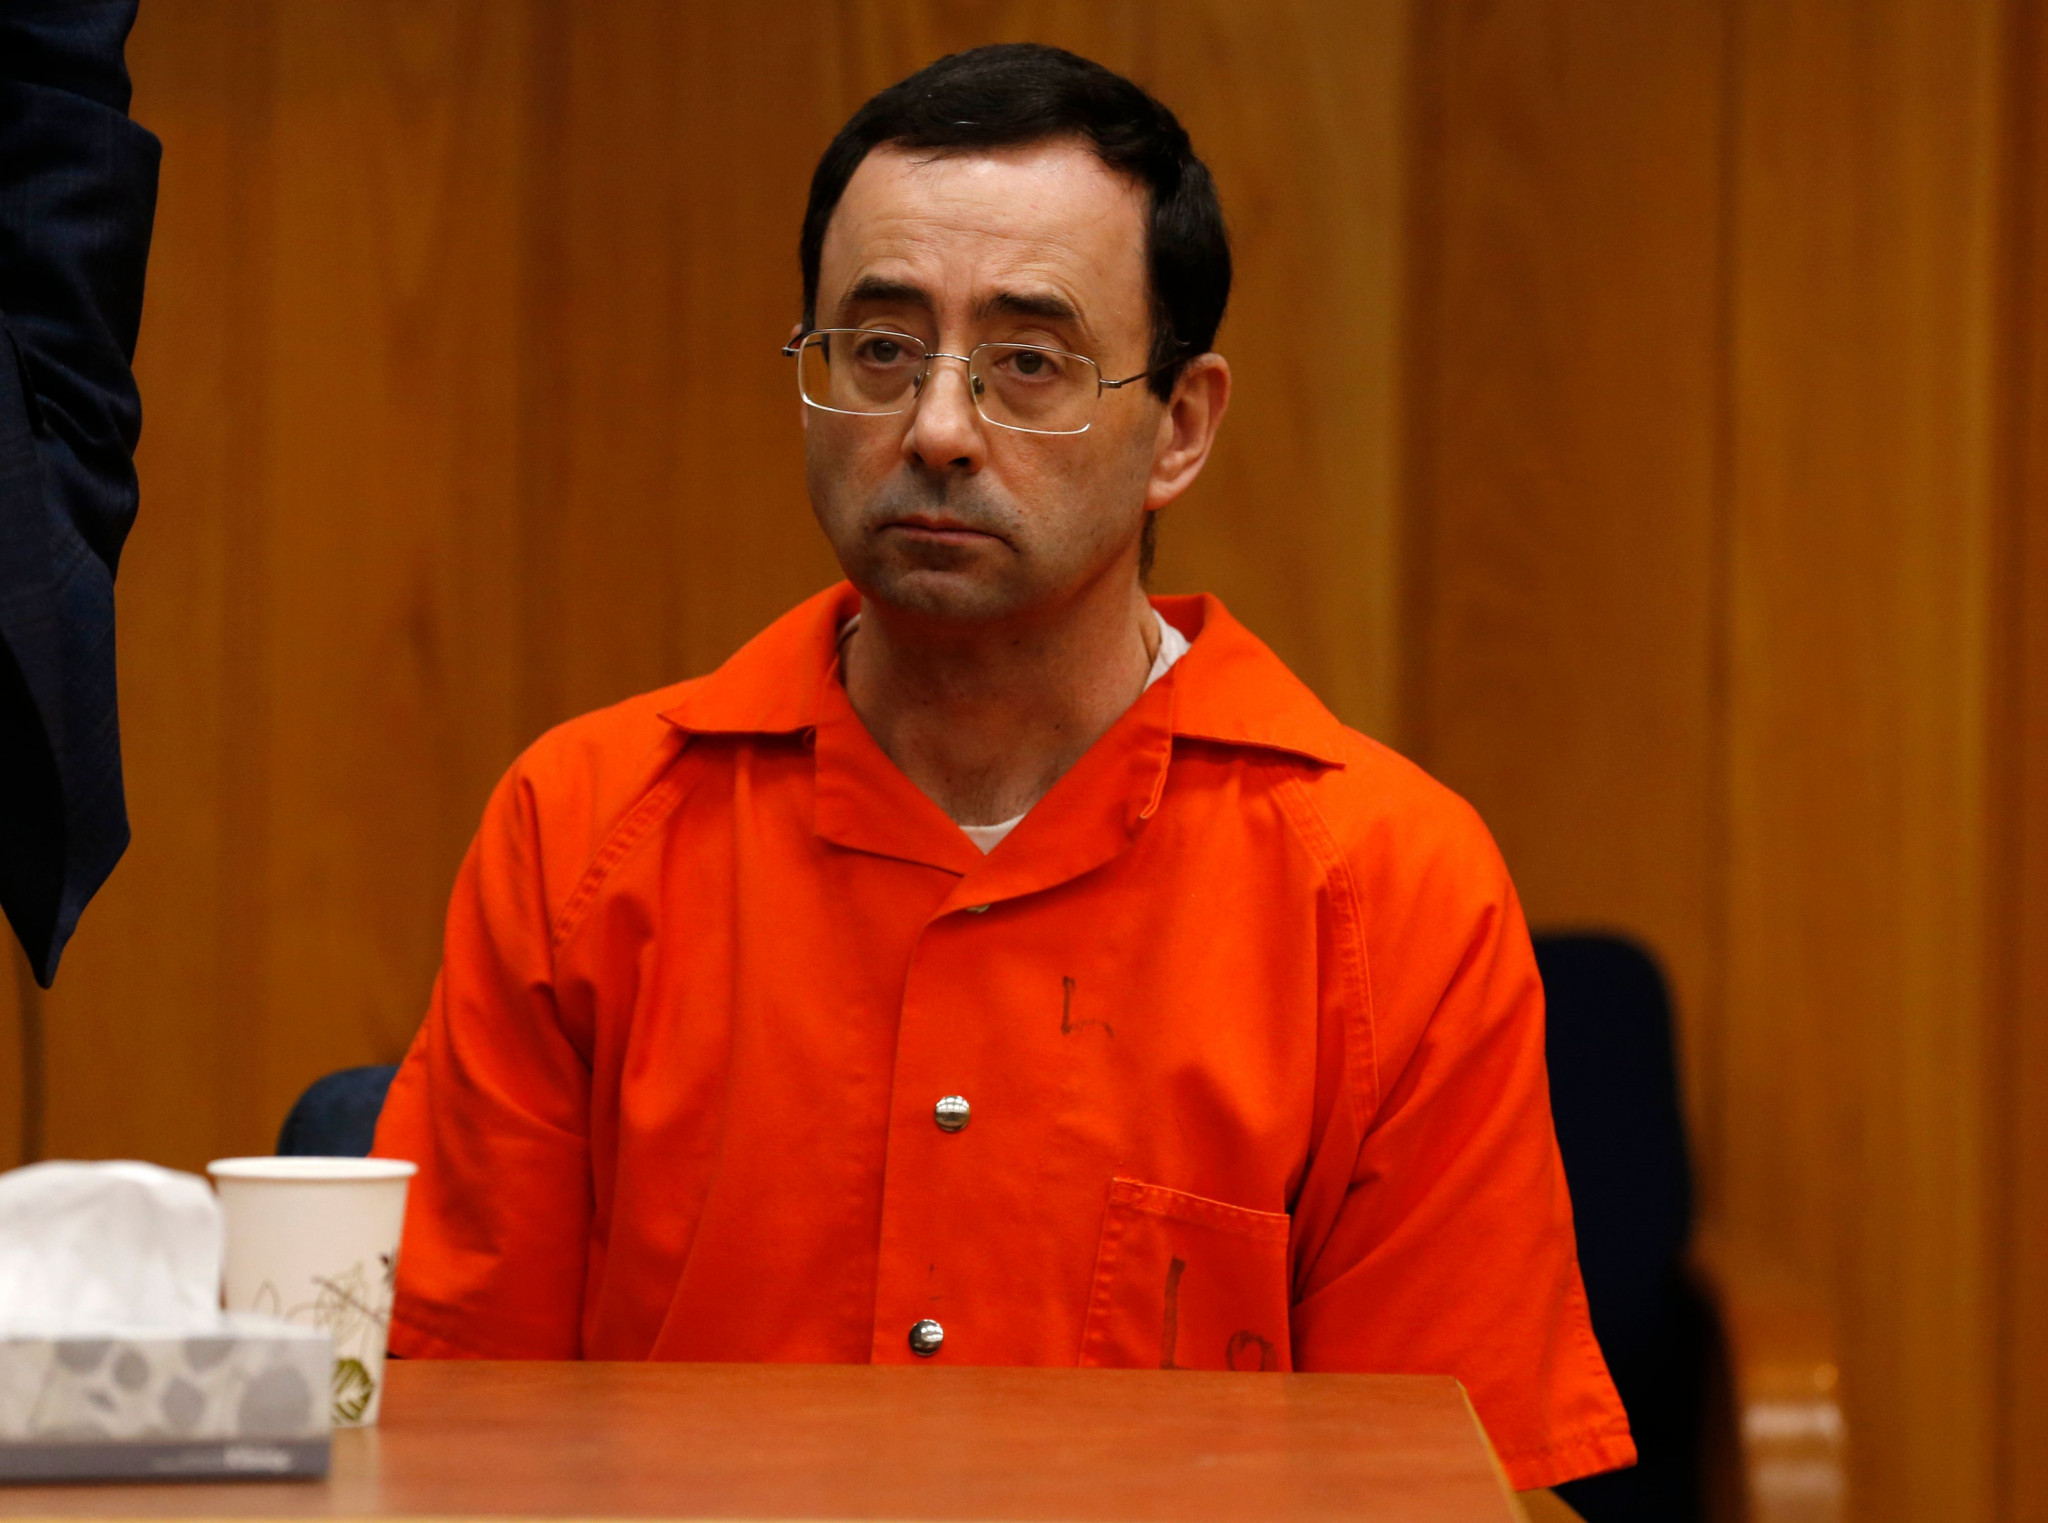 Larry Nassar served as USA Gymnastics doctor at multiple Olympic Games ©Getty Images